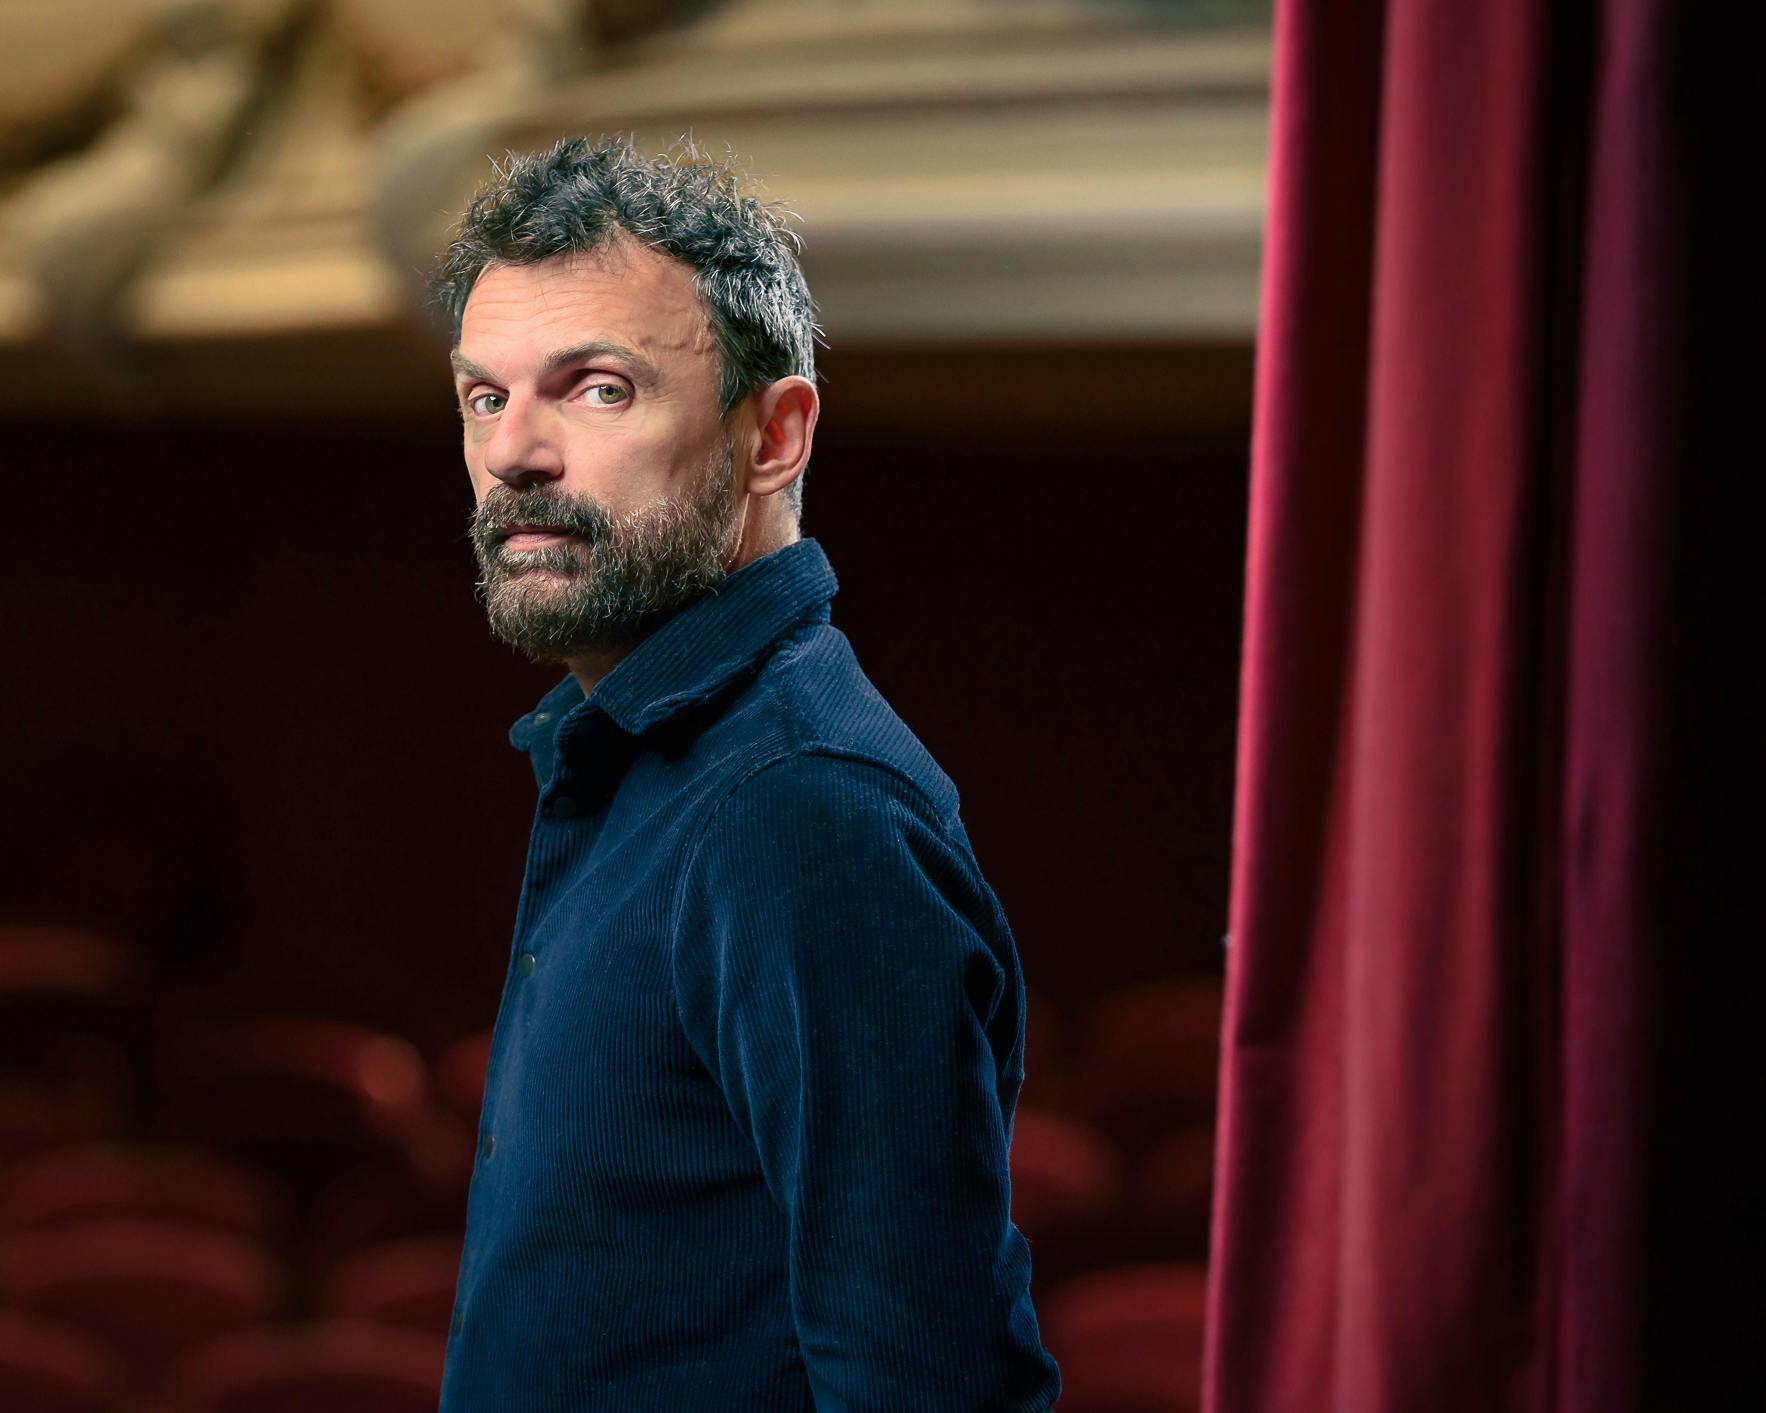 Portrait of Emilio Calcagno in a theater wearing a blue shirt